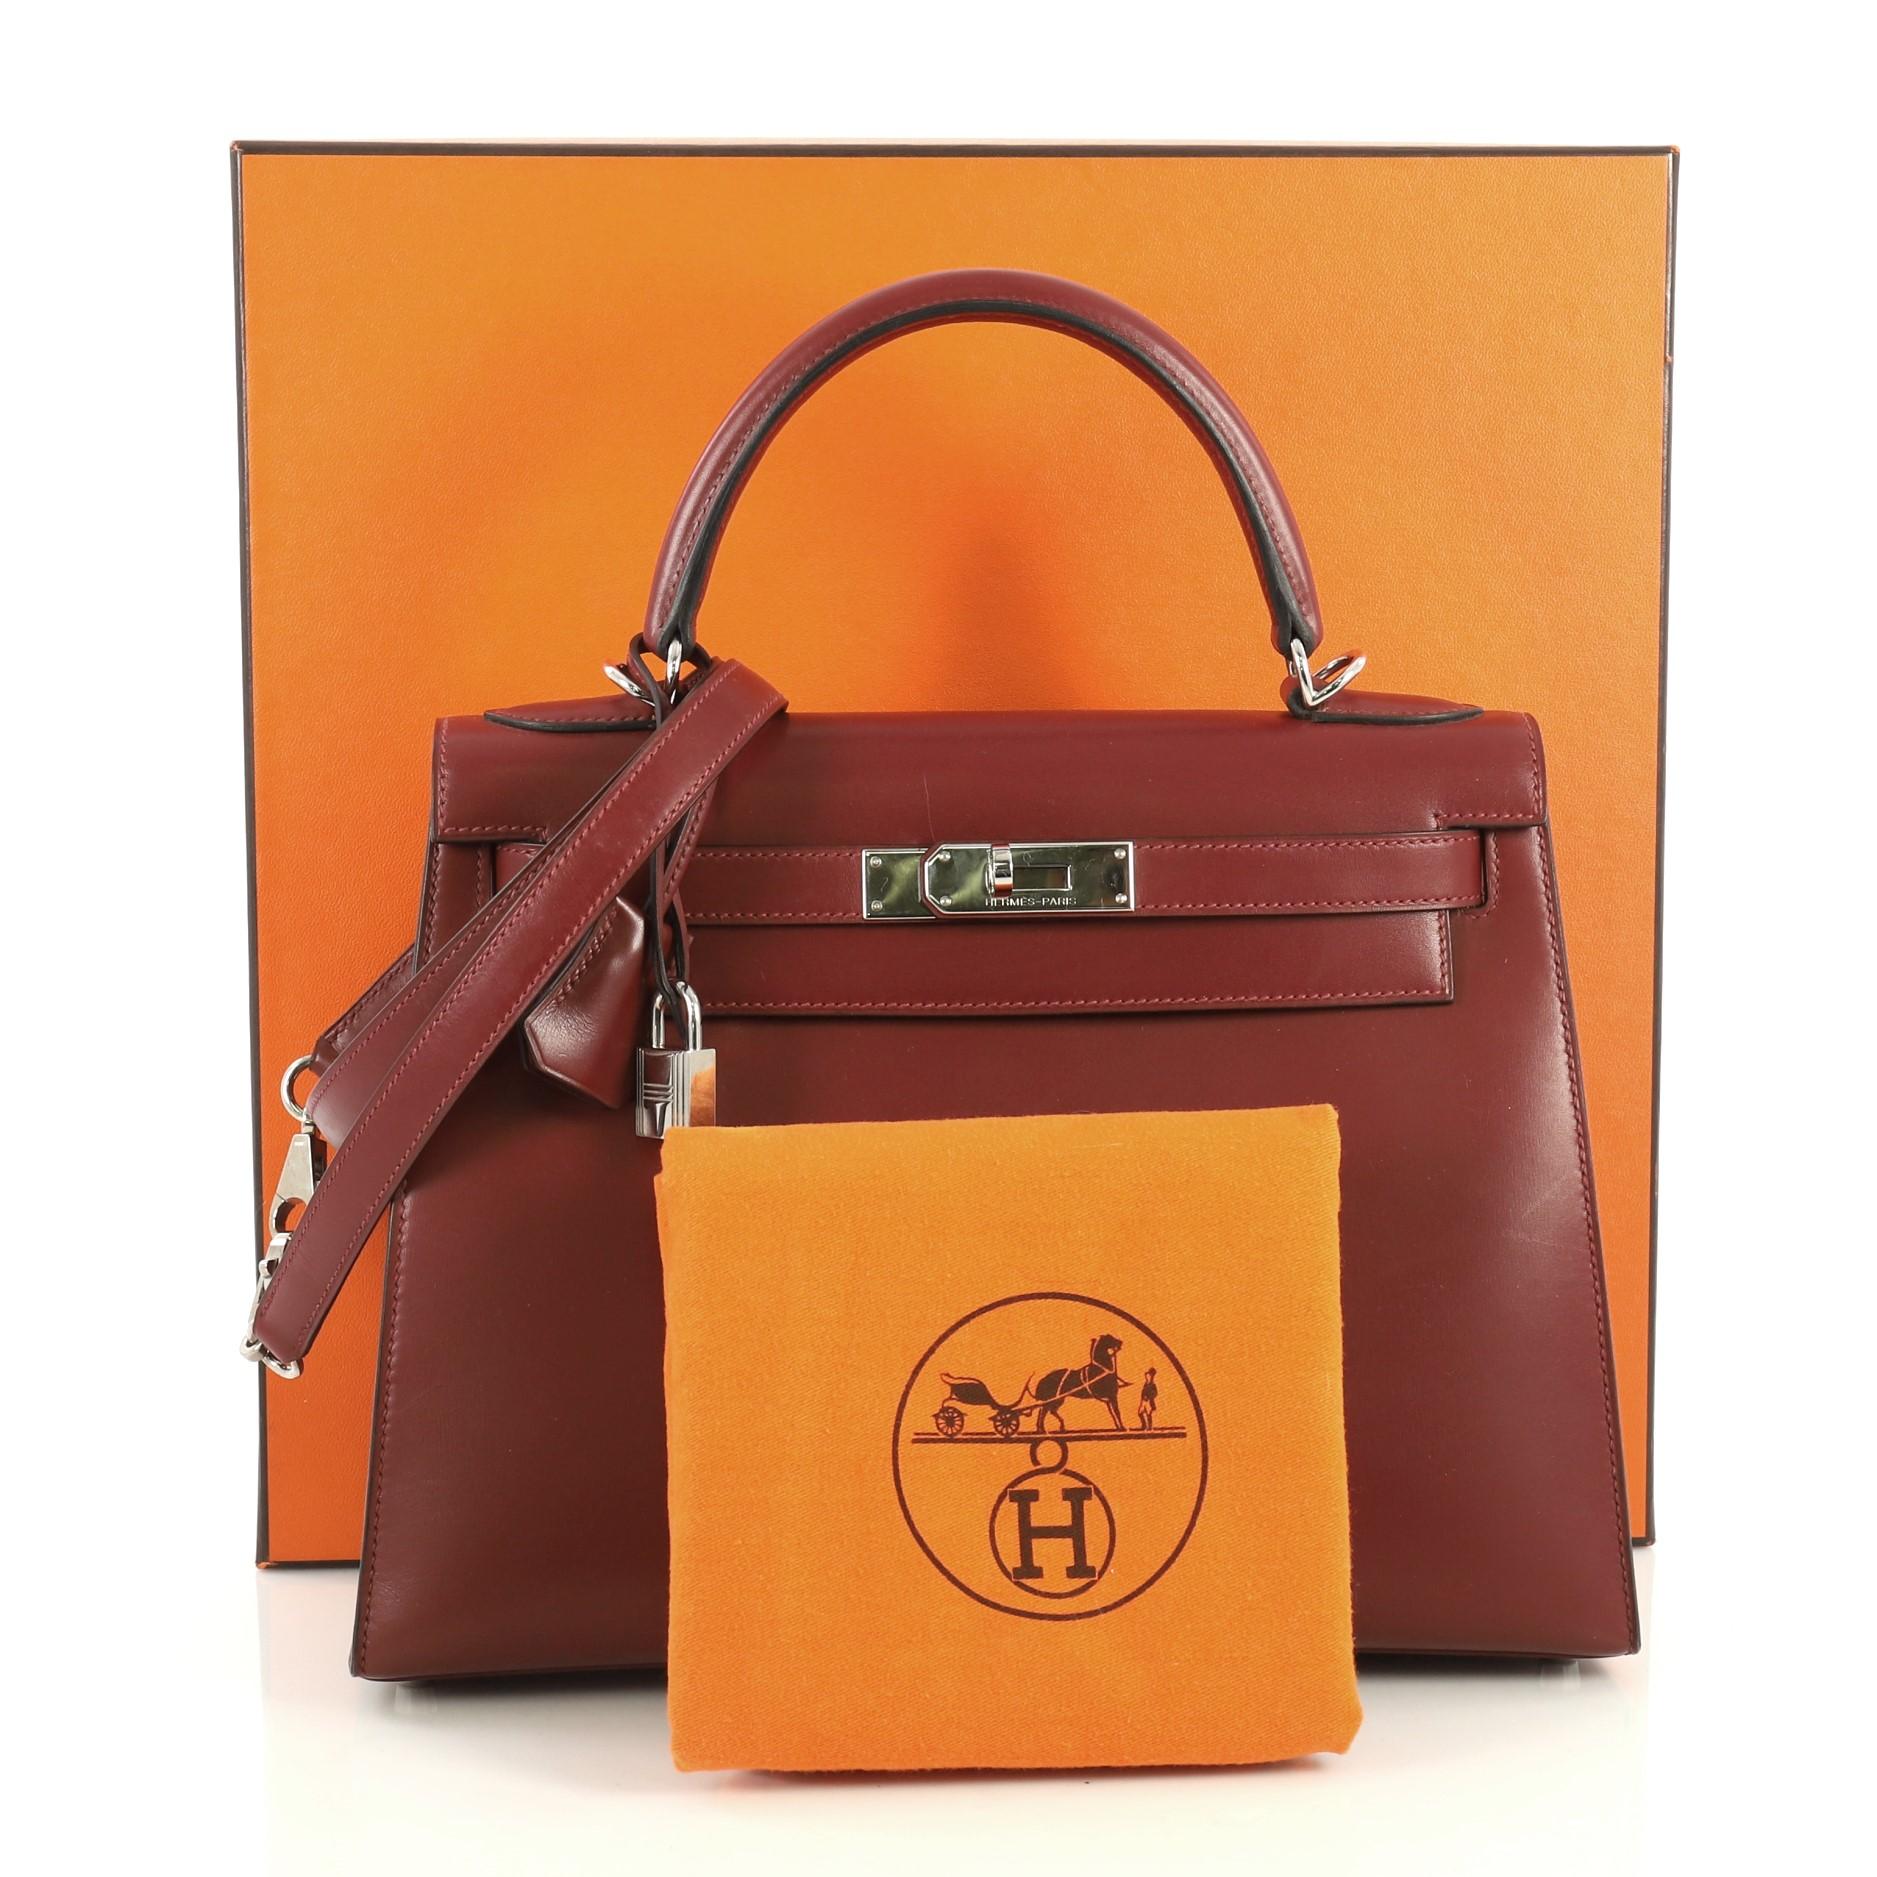 This Hermes Kelly Handbag Rouge H Box Calf with Palladium Hardware 28, crafted in Rouge H red Box Calf leather, features a single rolled top handle, frontal flap, and palladium hardware. Its turn-lock closure opens to a Rouge H red Chevre leather